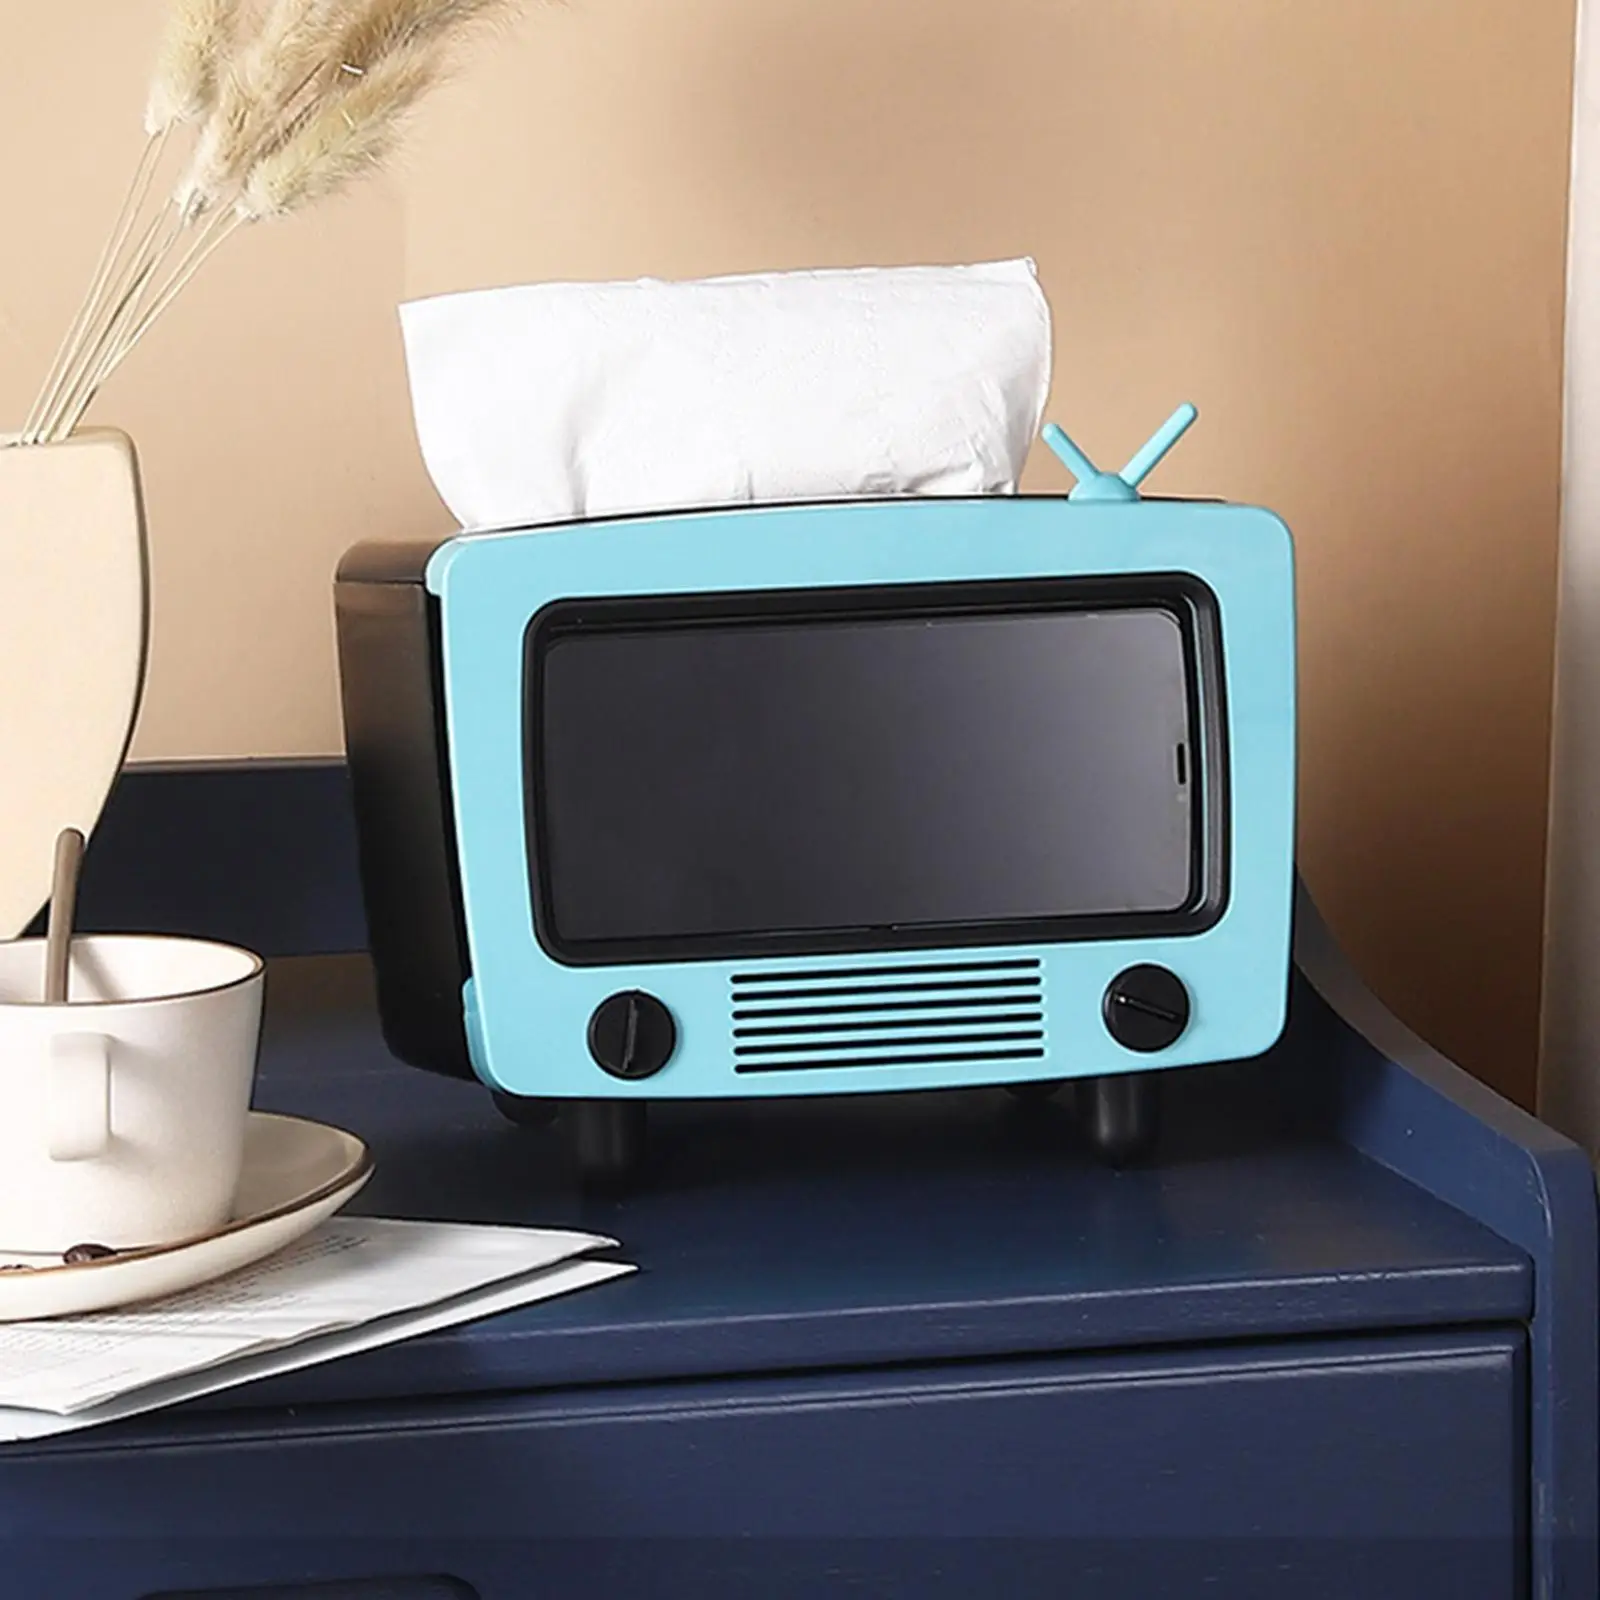 TV Shaped Tissue Box, Phone Holder Stand Cute Practical  Container for Vanity Countertops Office Desktop Decor for All Phones